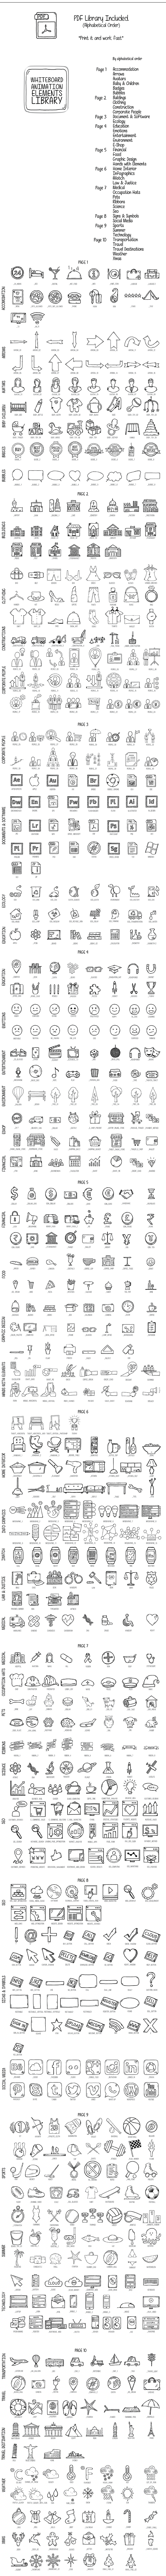 Whiteboard Animated Elements Library - 10